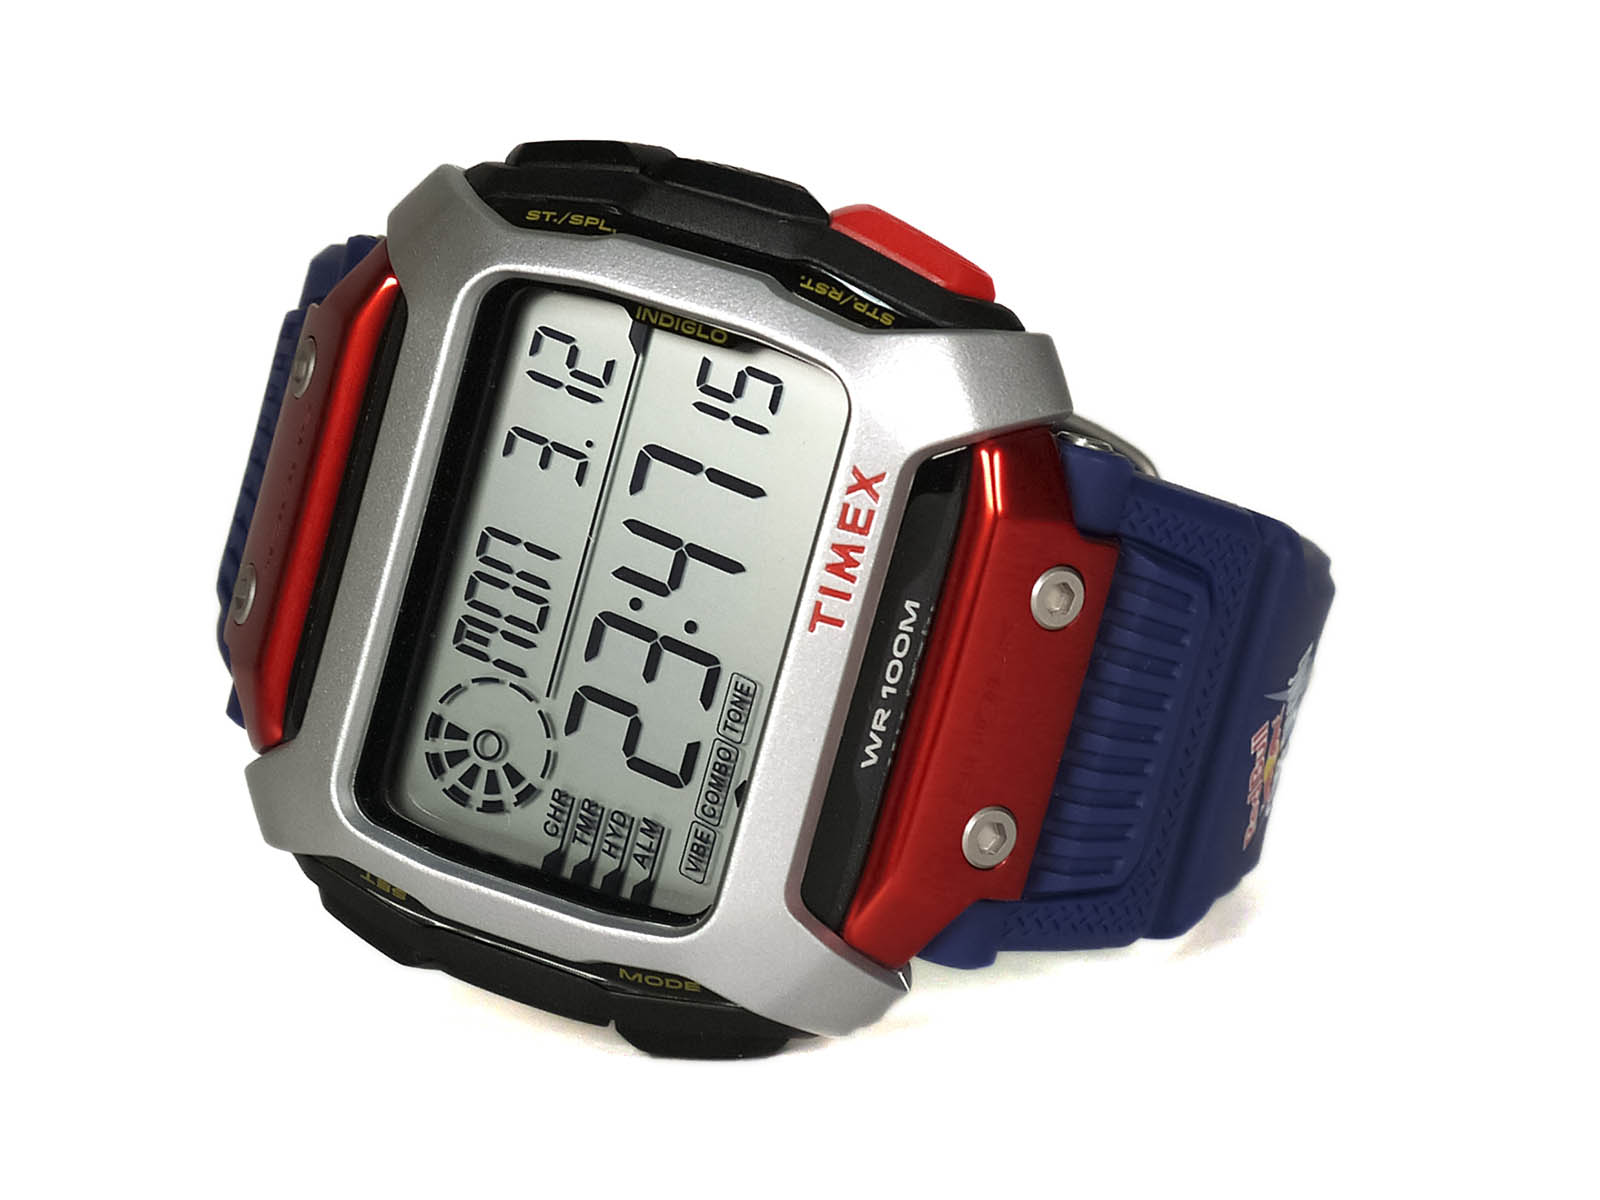 timex red bull